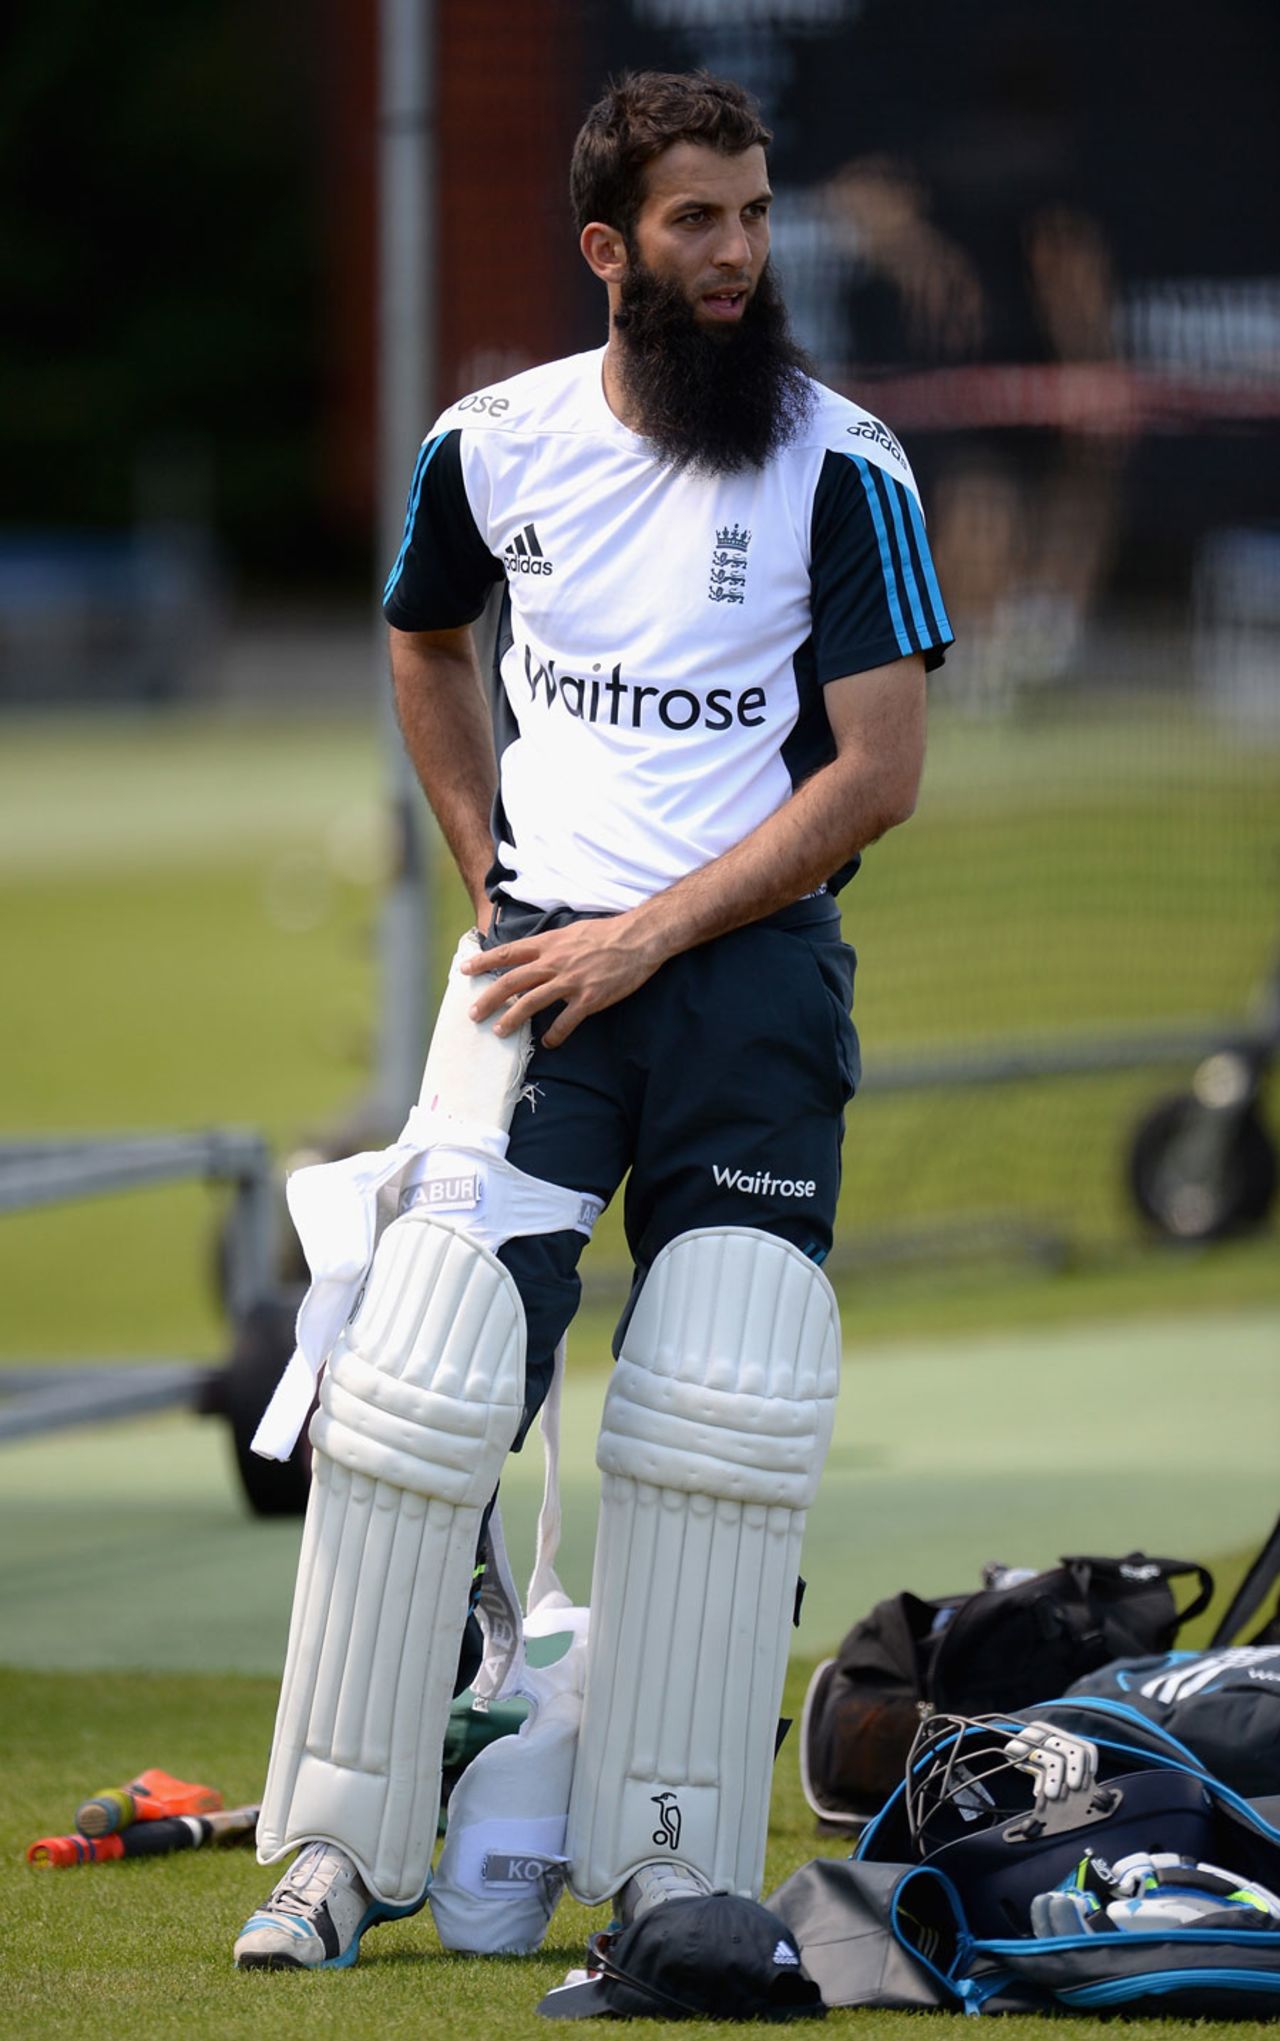 Moeen Ali is expected to make his Test debut against Sri Lanka, Lord's, June 10, 2014